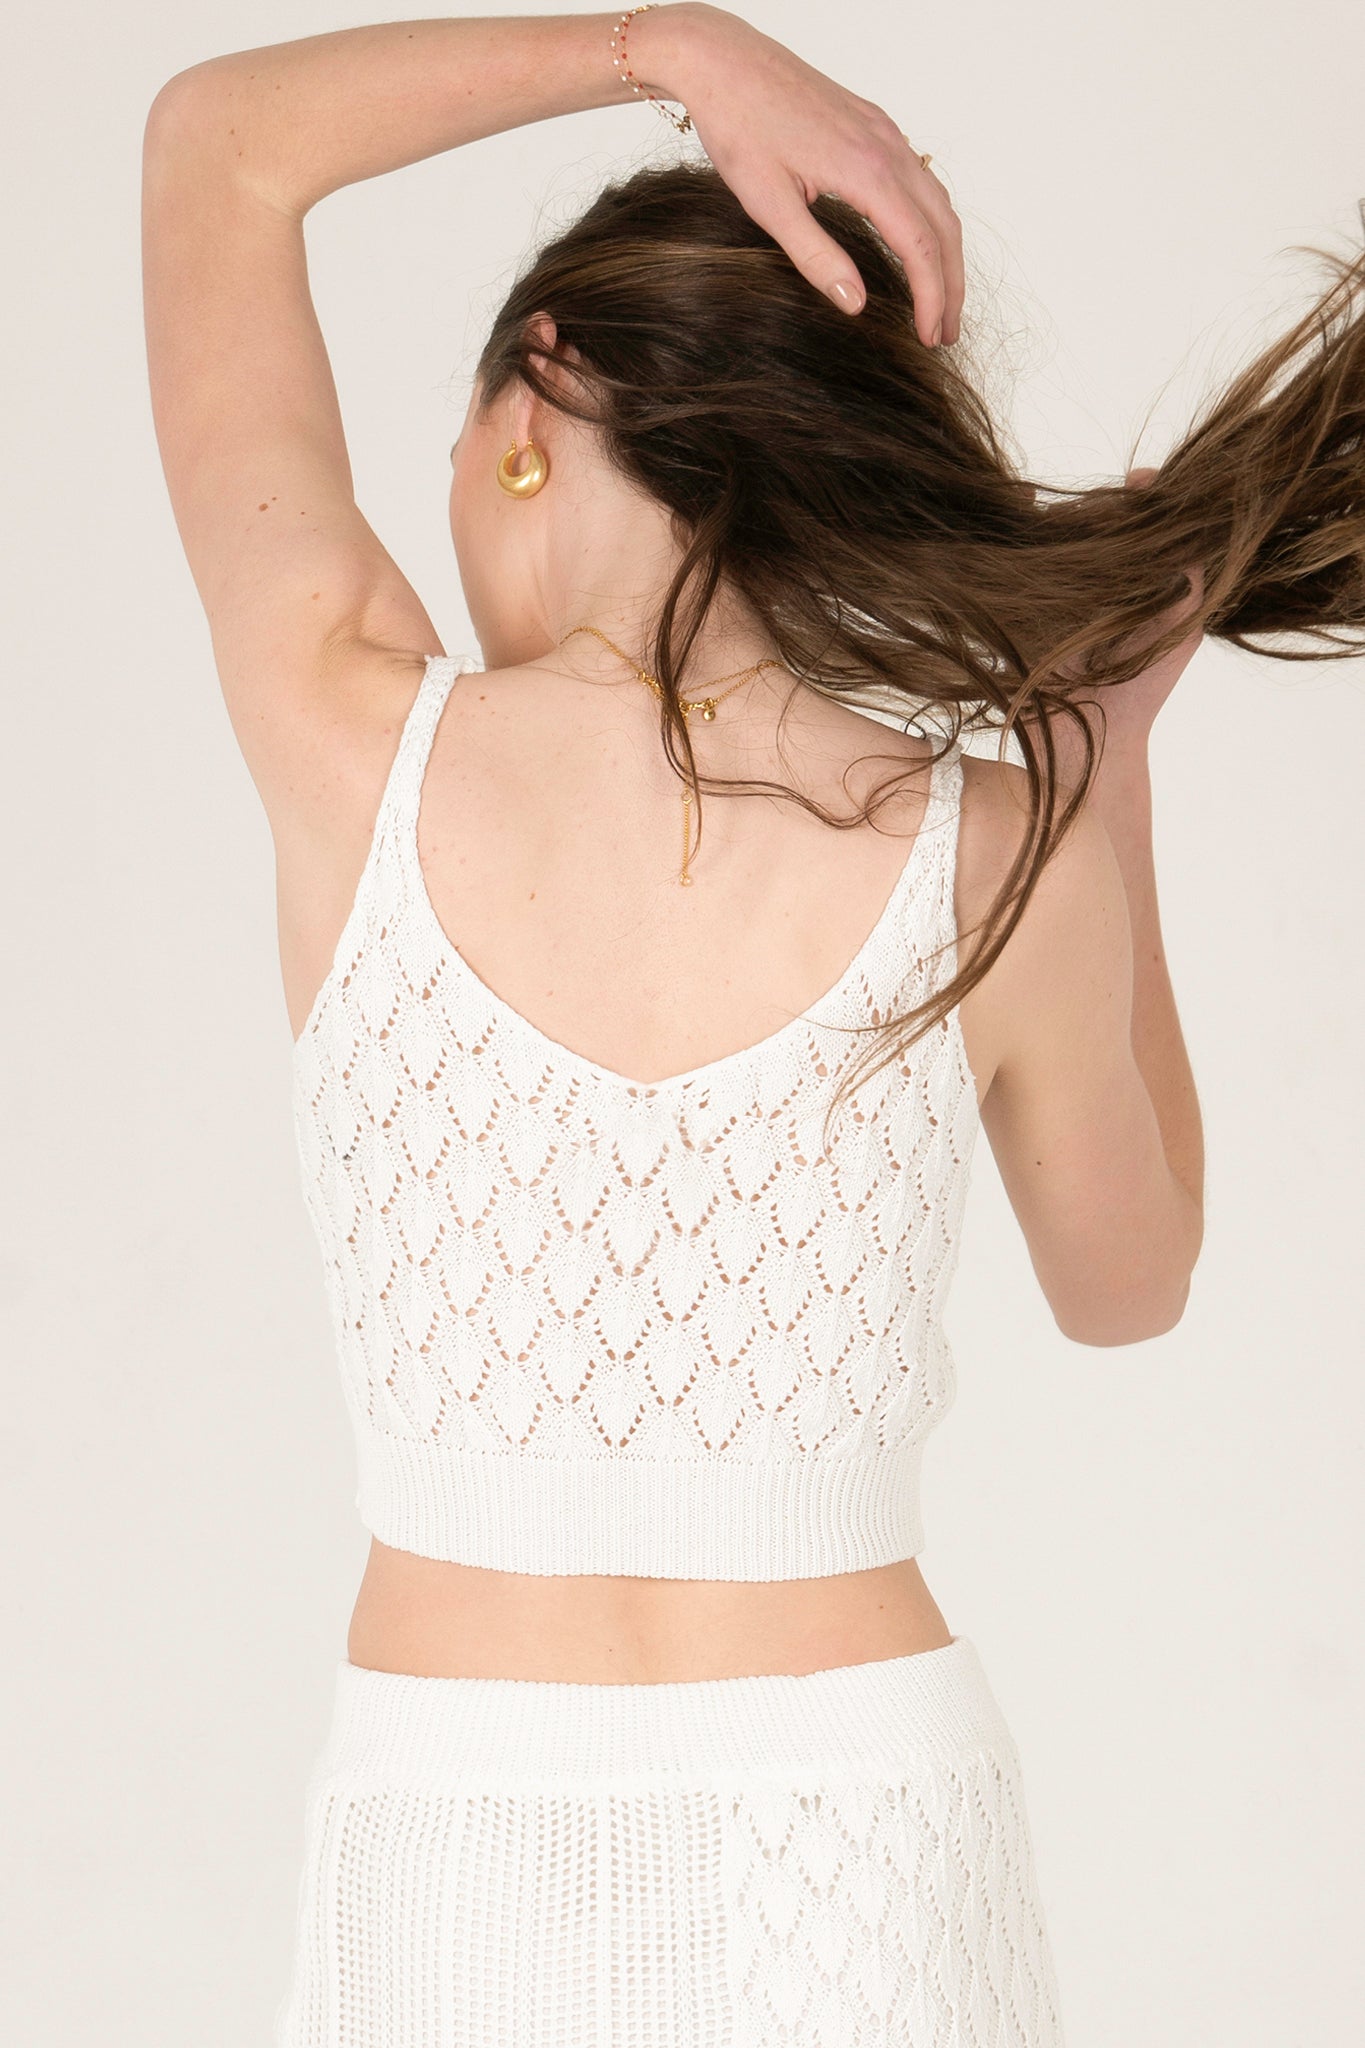 View 4 of Gaia Cropped Sweater Tank, a Tops from Larrea Cove. Detail: .